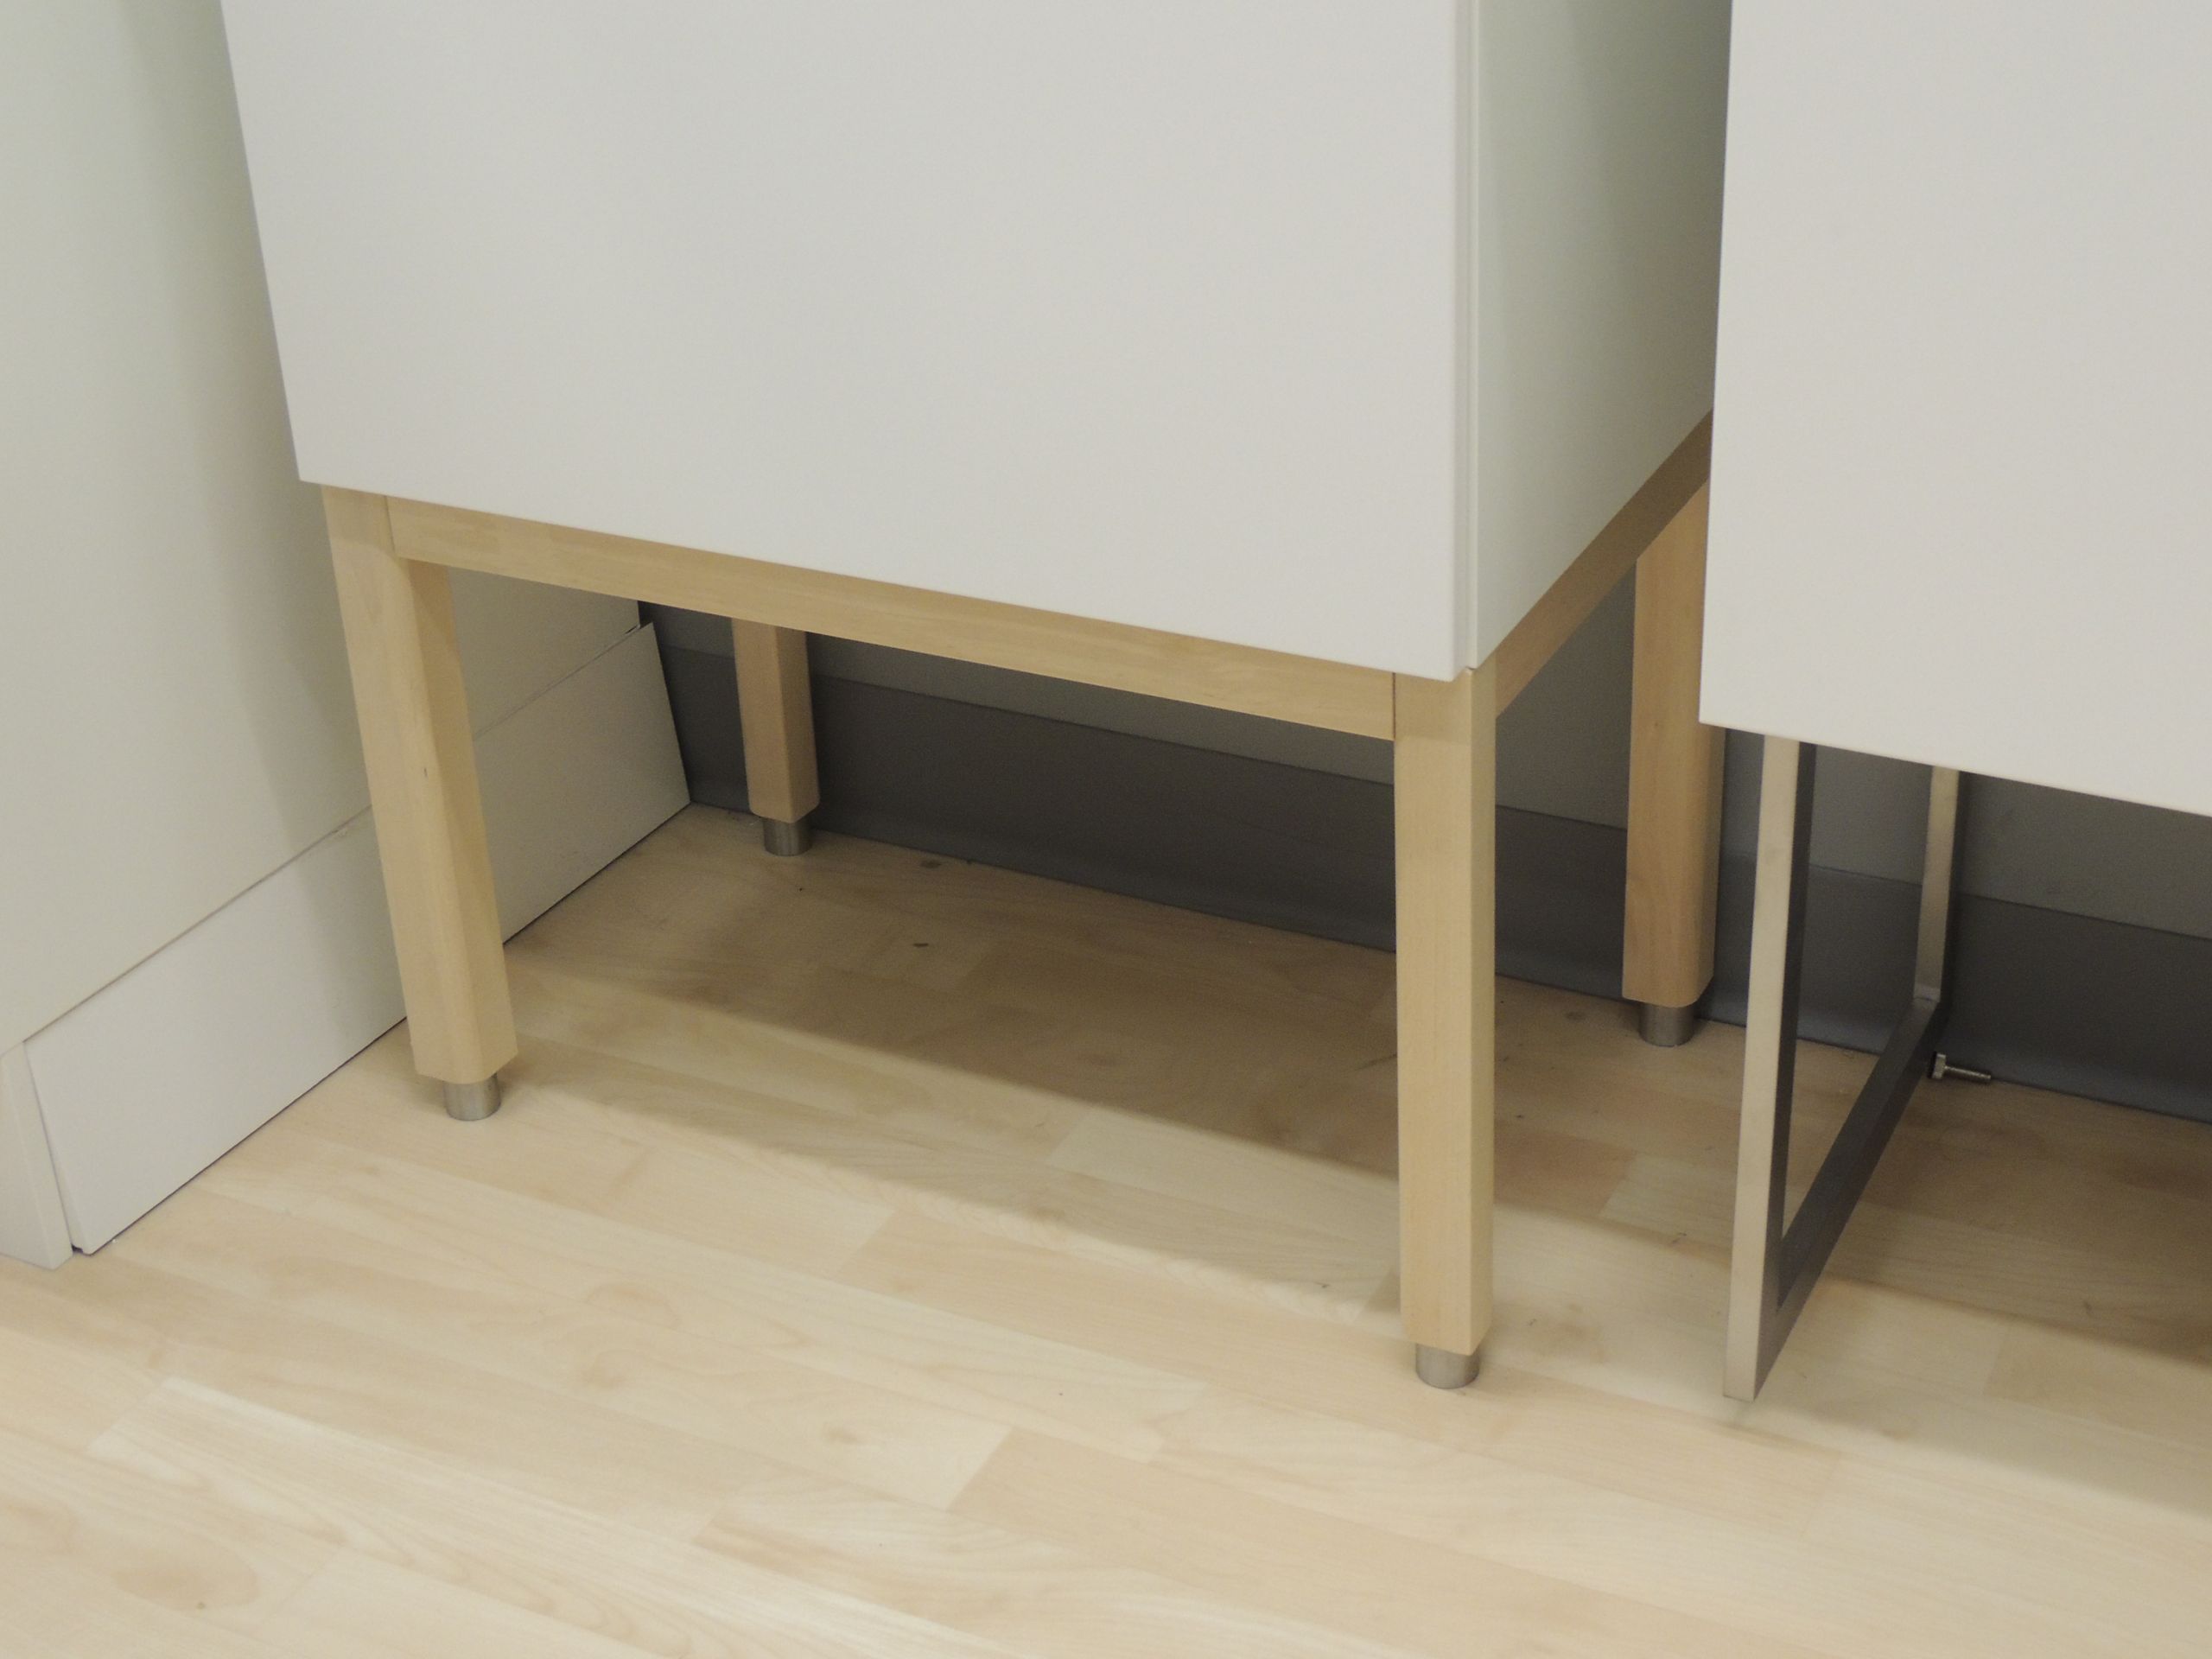 Kitchen Cabinet Leg
 Can’t Find It on the IKEA website You’re Not Alone